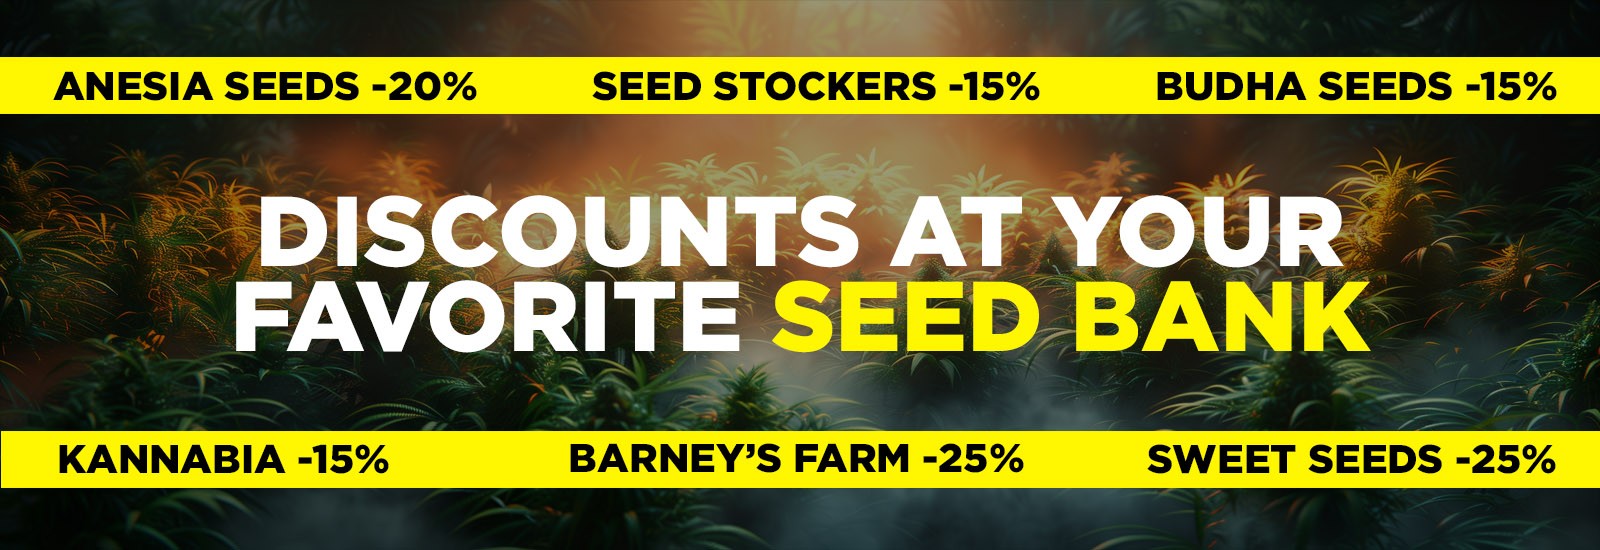 Seeds offers